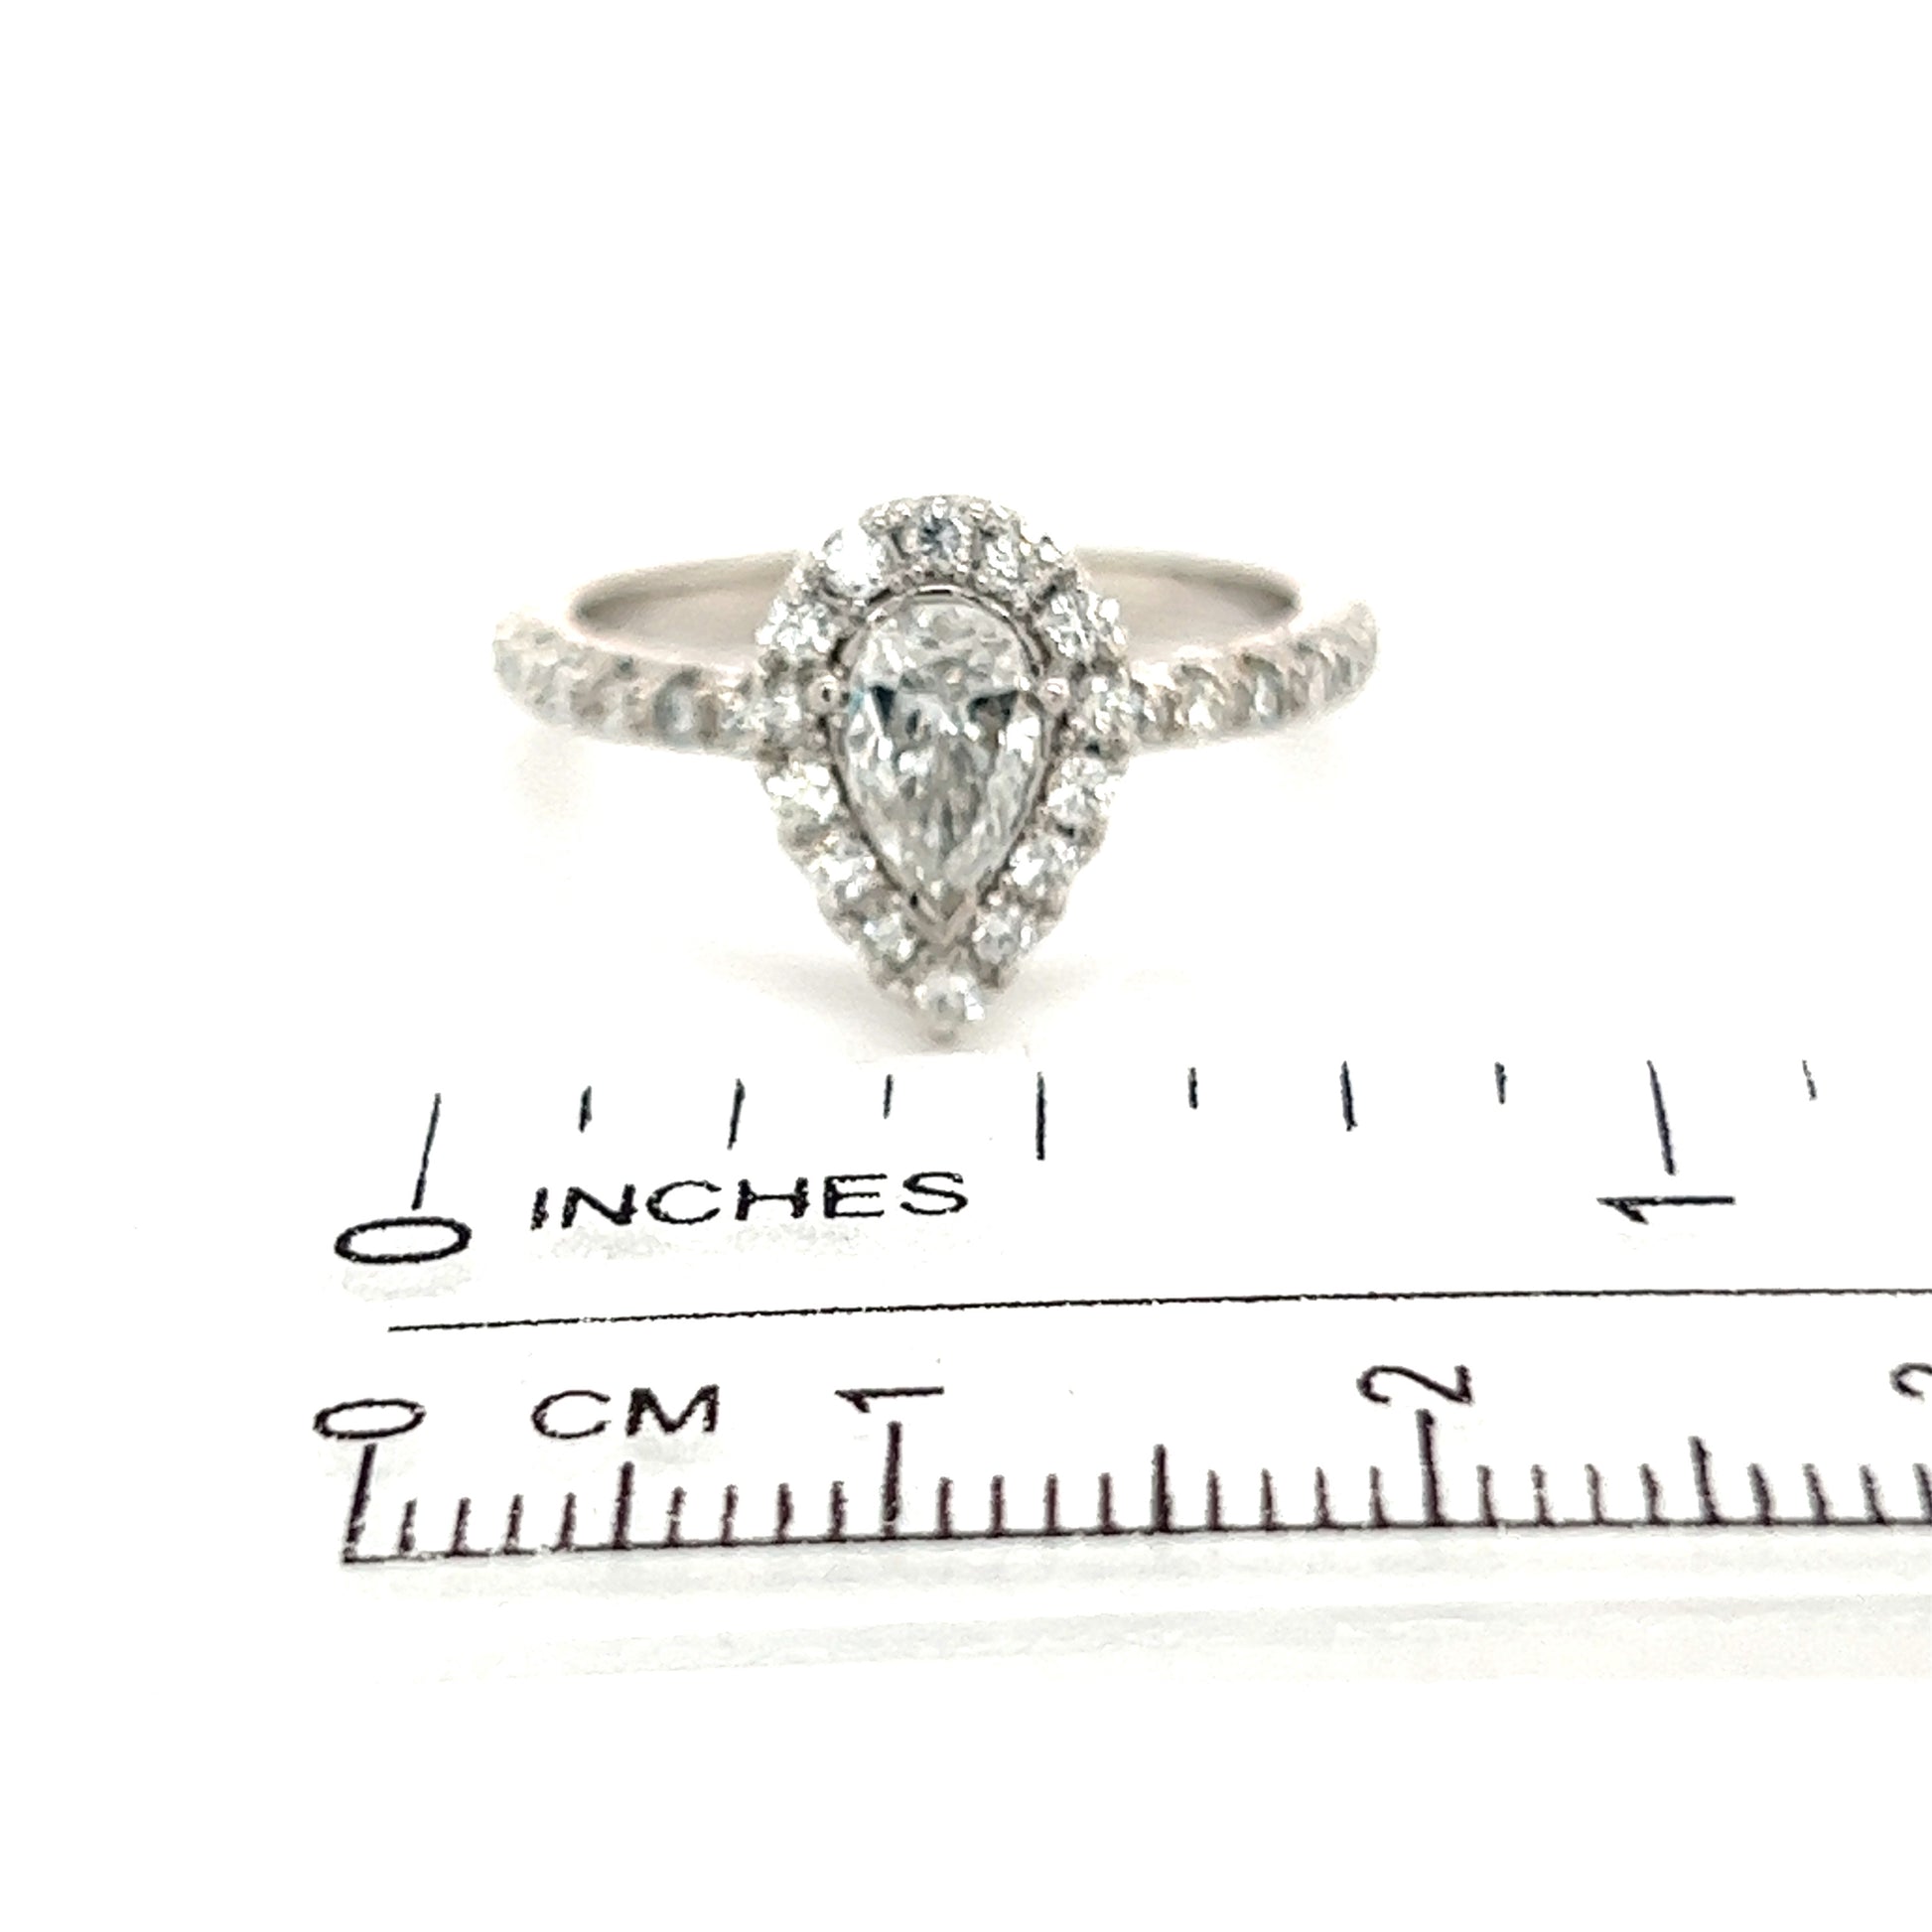 Diamond Engagement Ring 14k White Gold 0.90 TCW Certified $4,950 210736 - Certified Fine Jewelry